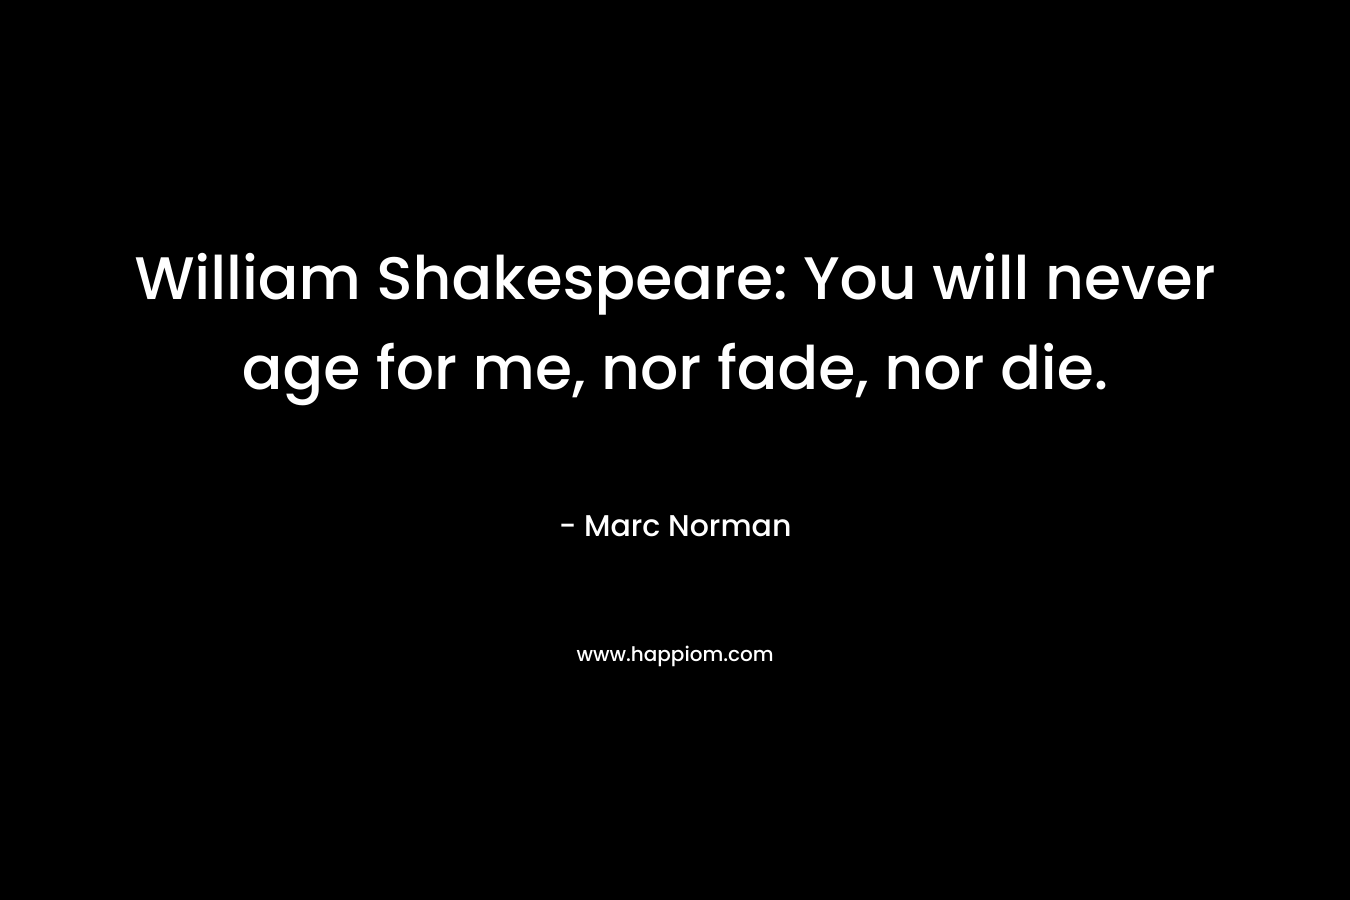 William Shakespeare: You will never age for me, nor fade, nor die. – Marc Norman